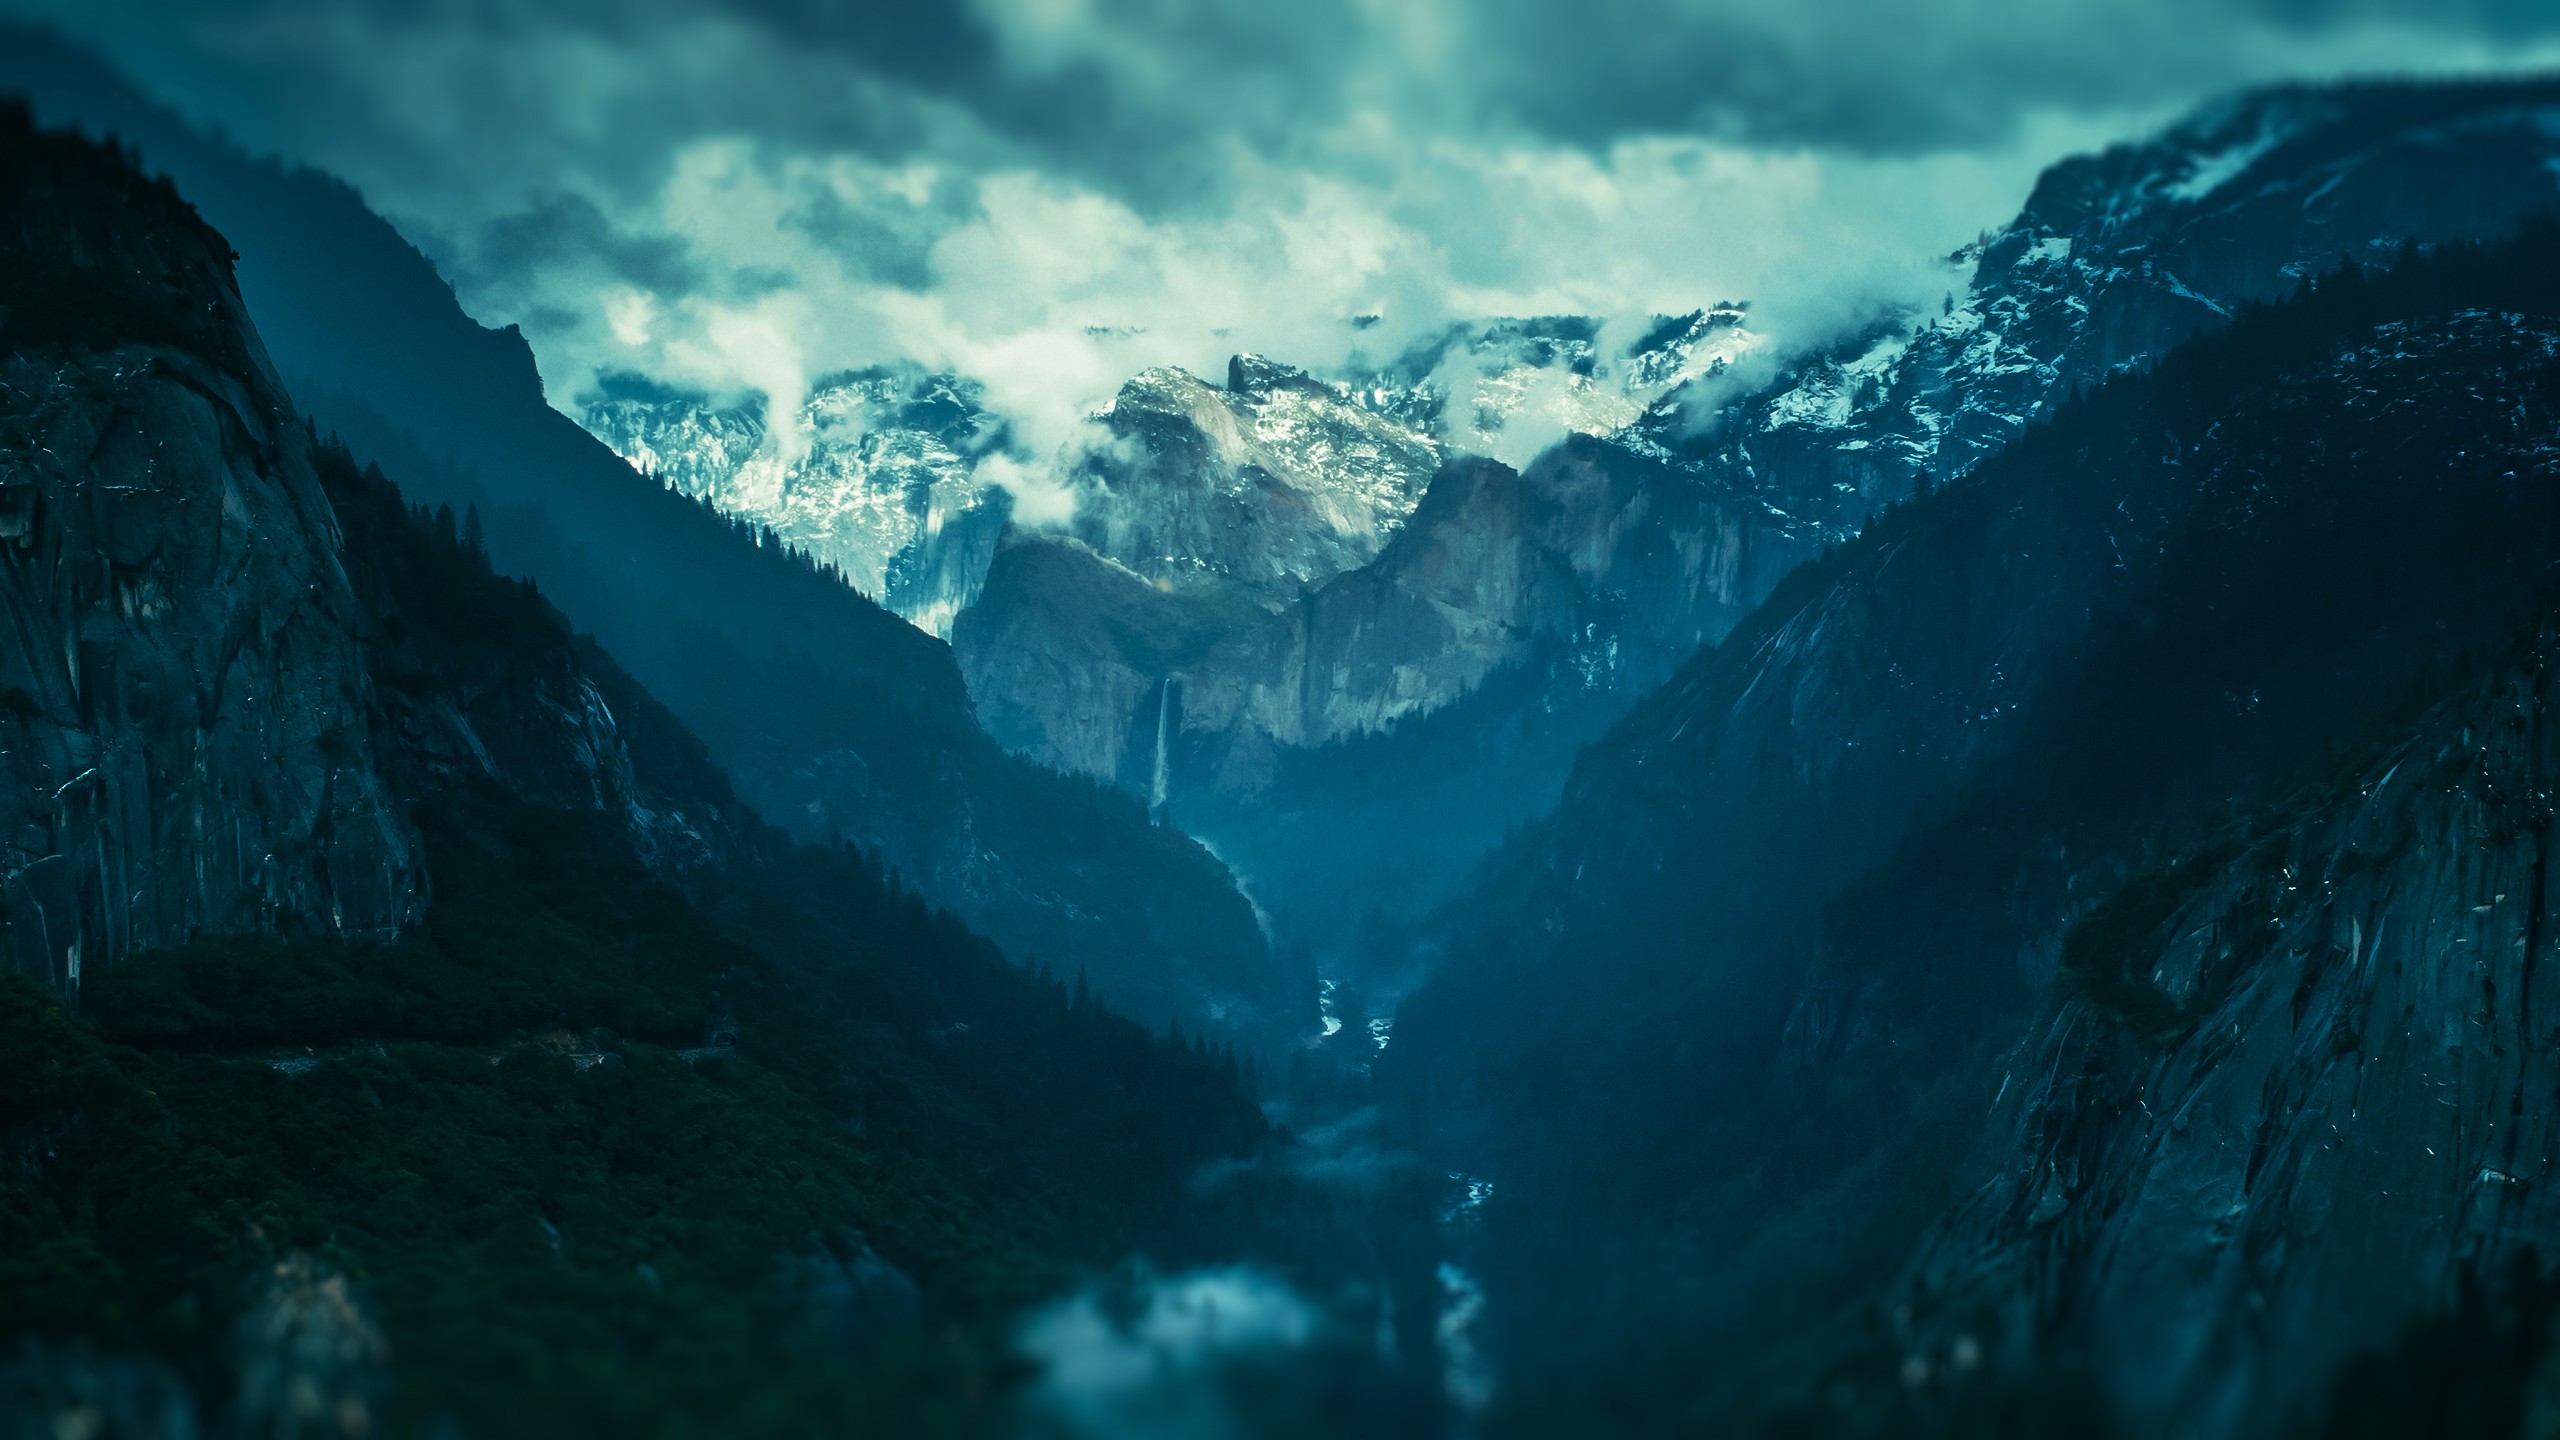 General 2560x1440 nature mountains valley winter overcast landscape snowy mountain